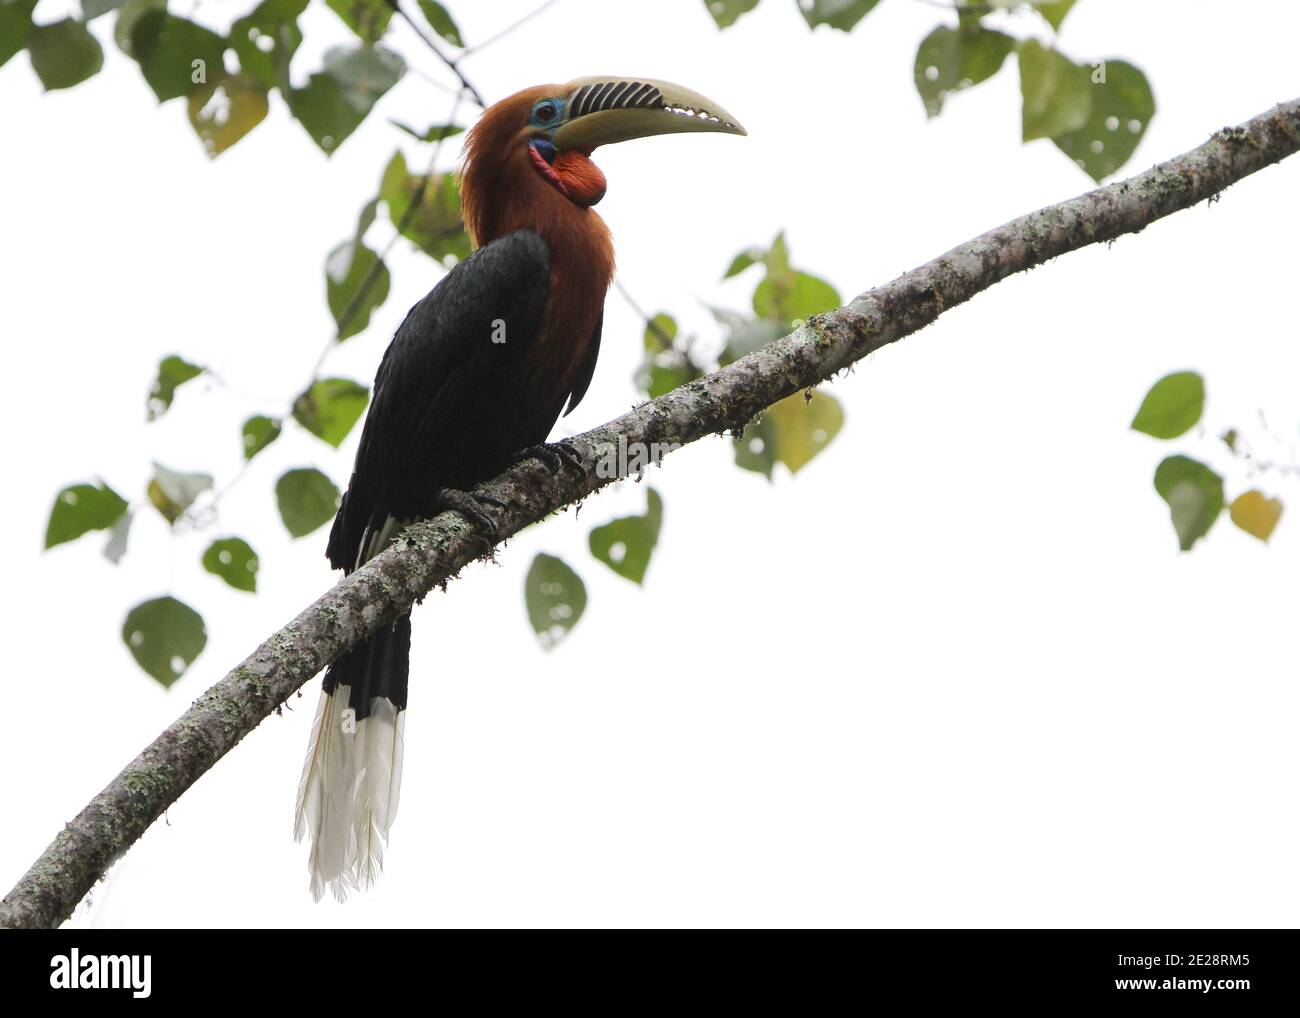 rufous-necked hornbill (Aceros nipalensis), perched on a branch, India, Himalaya Stock Photo